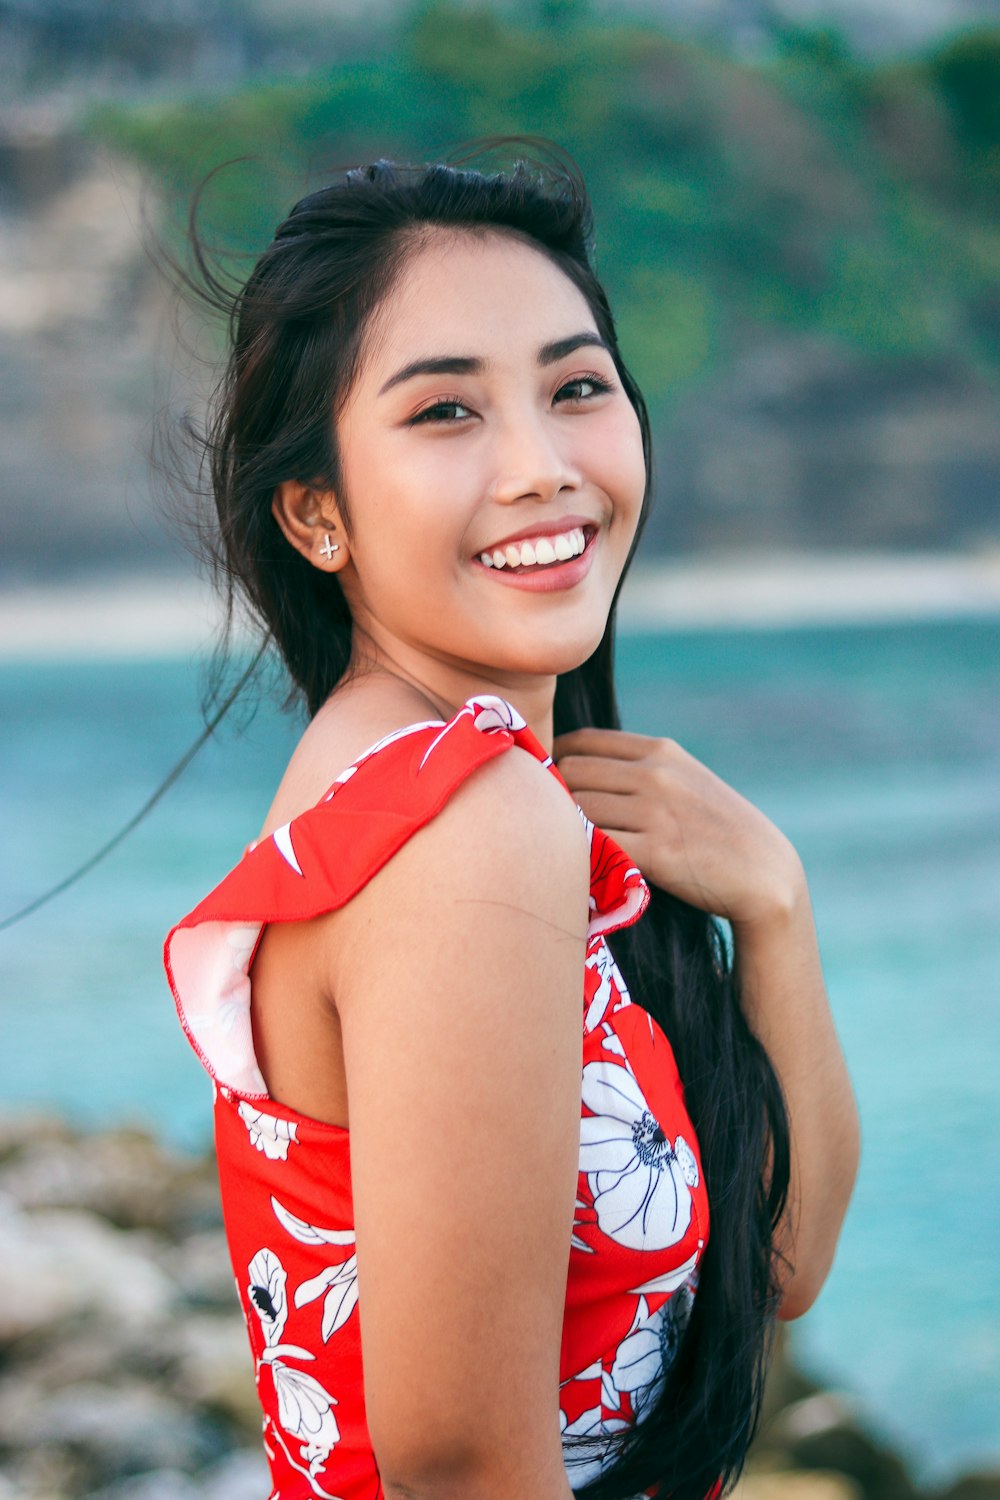 woman wearing white and red floral top across body of water